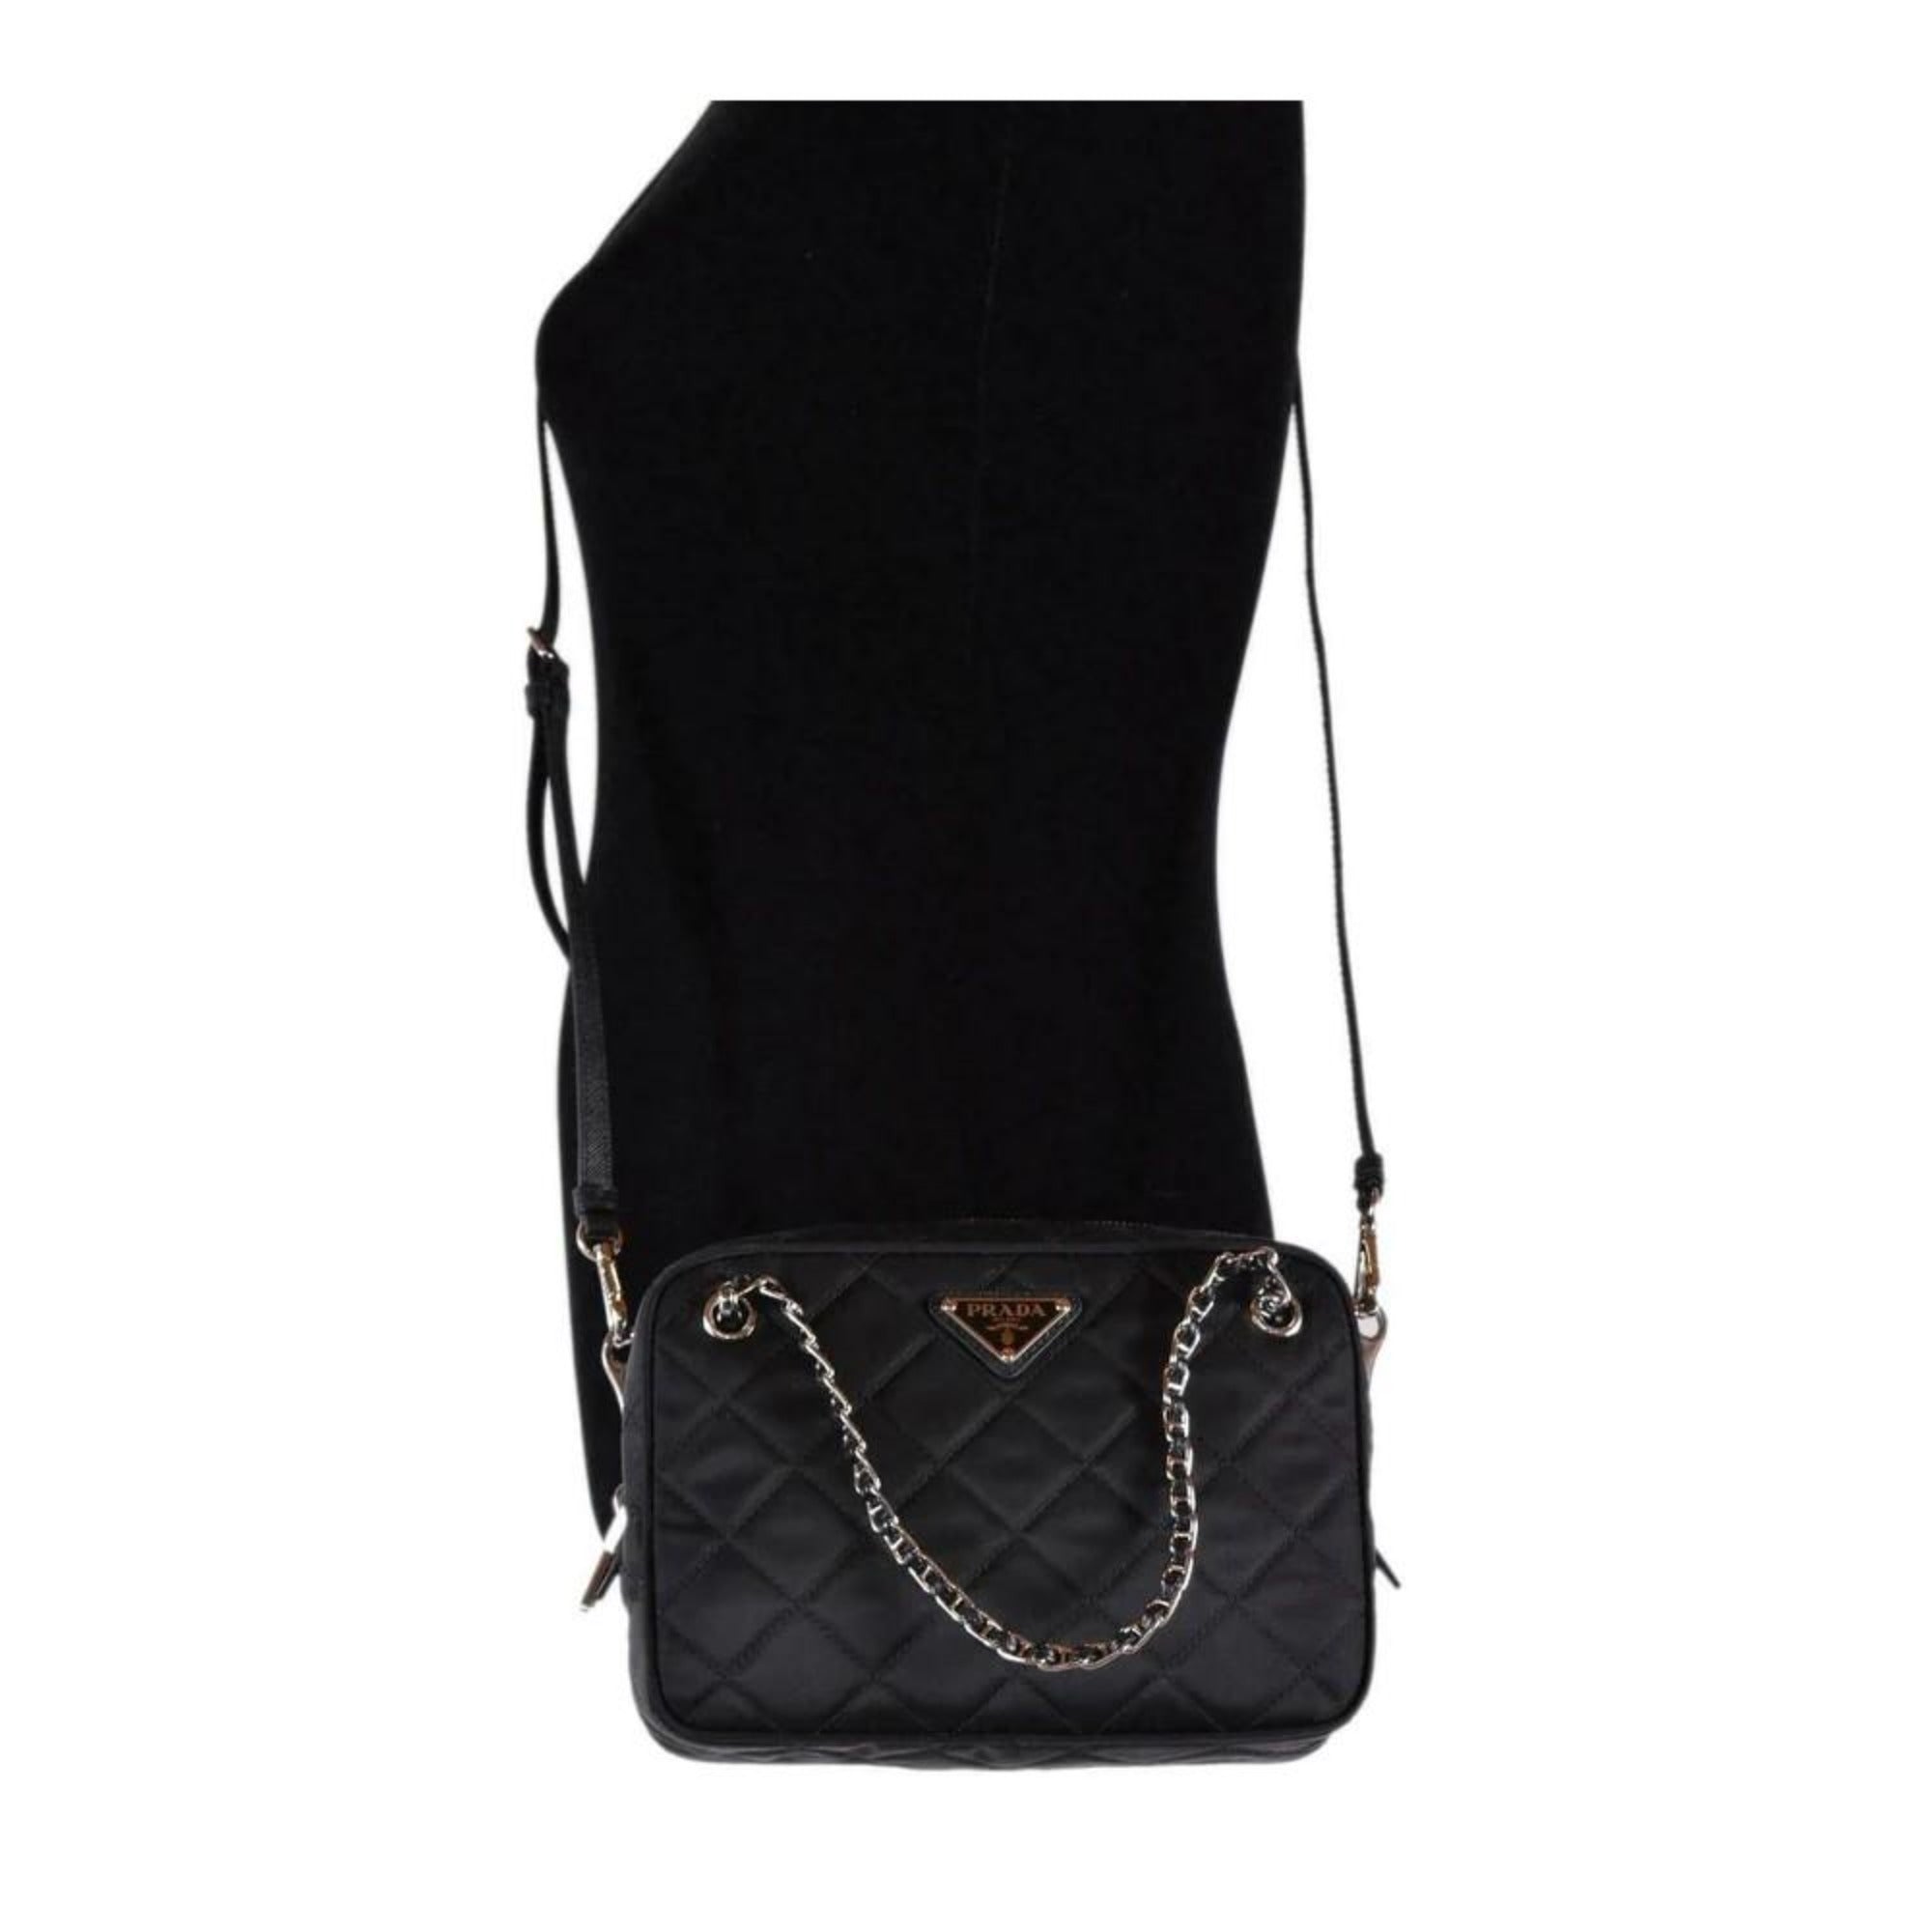 Prada Quilted Tessuto Nylon Black Bandoliera Triangle Logo Bag 1BH910 at_Queen_Bee_of_Beverly_Hills